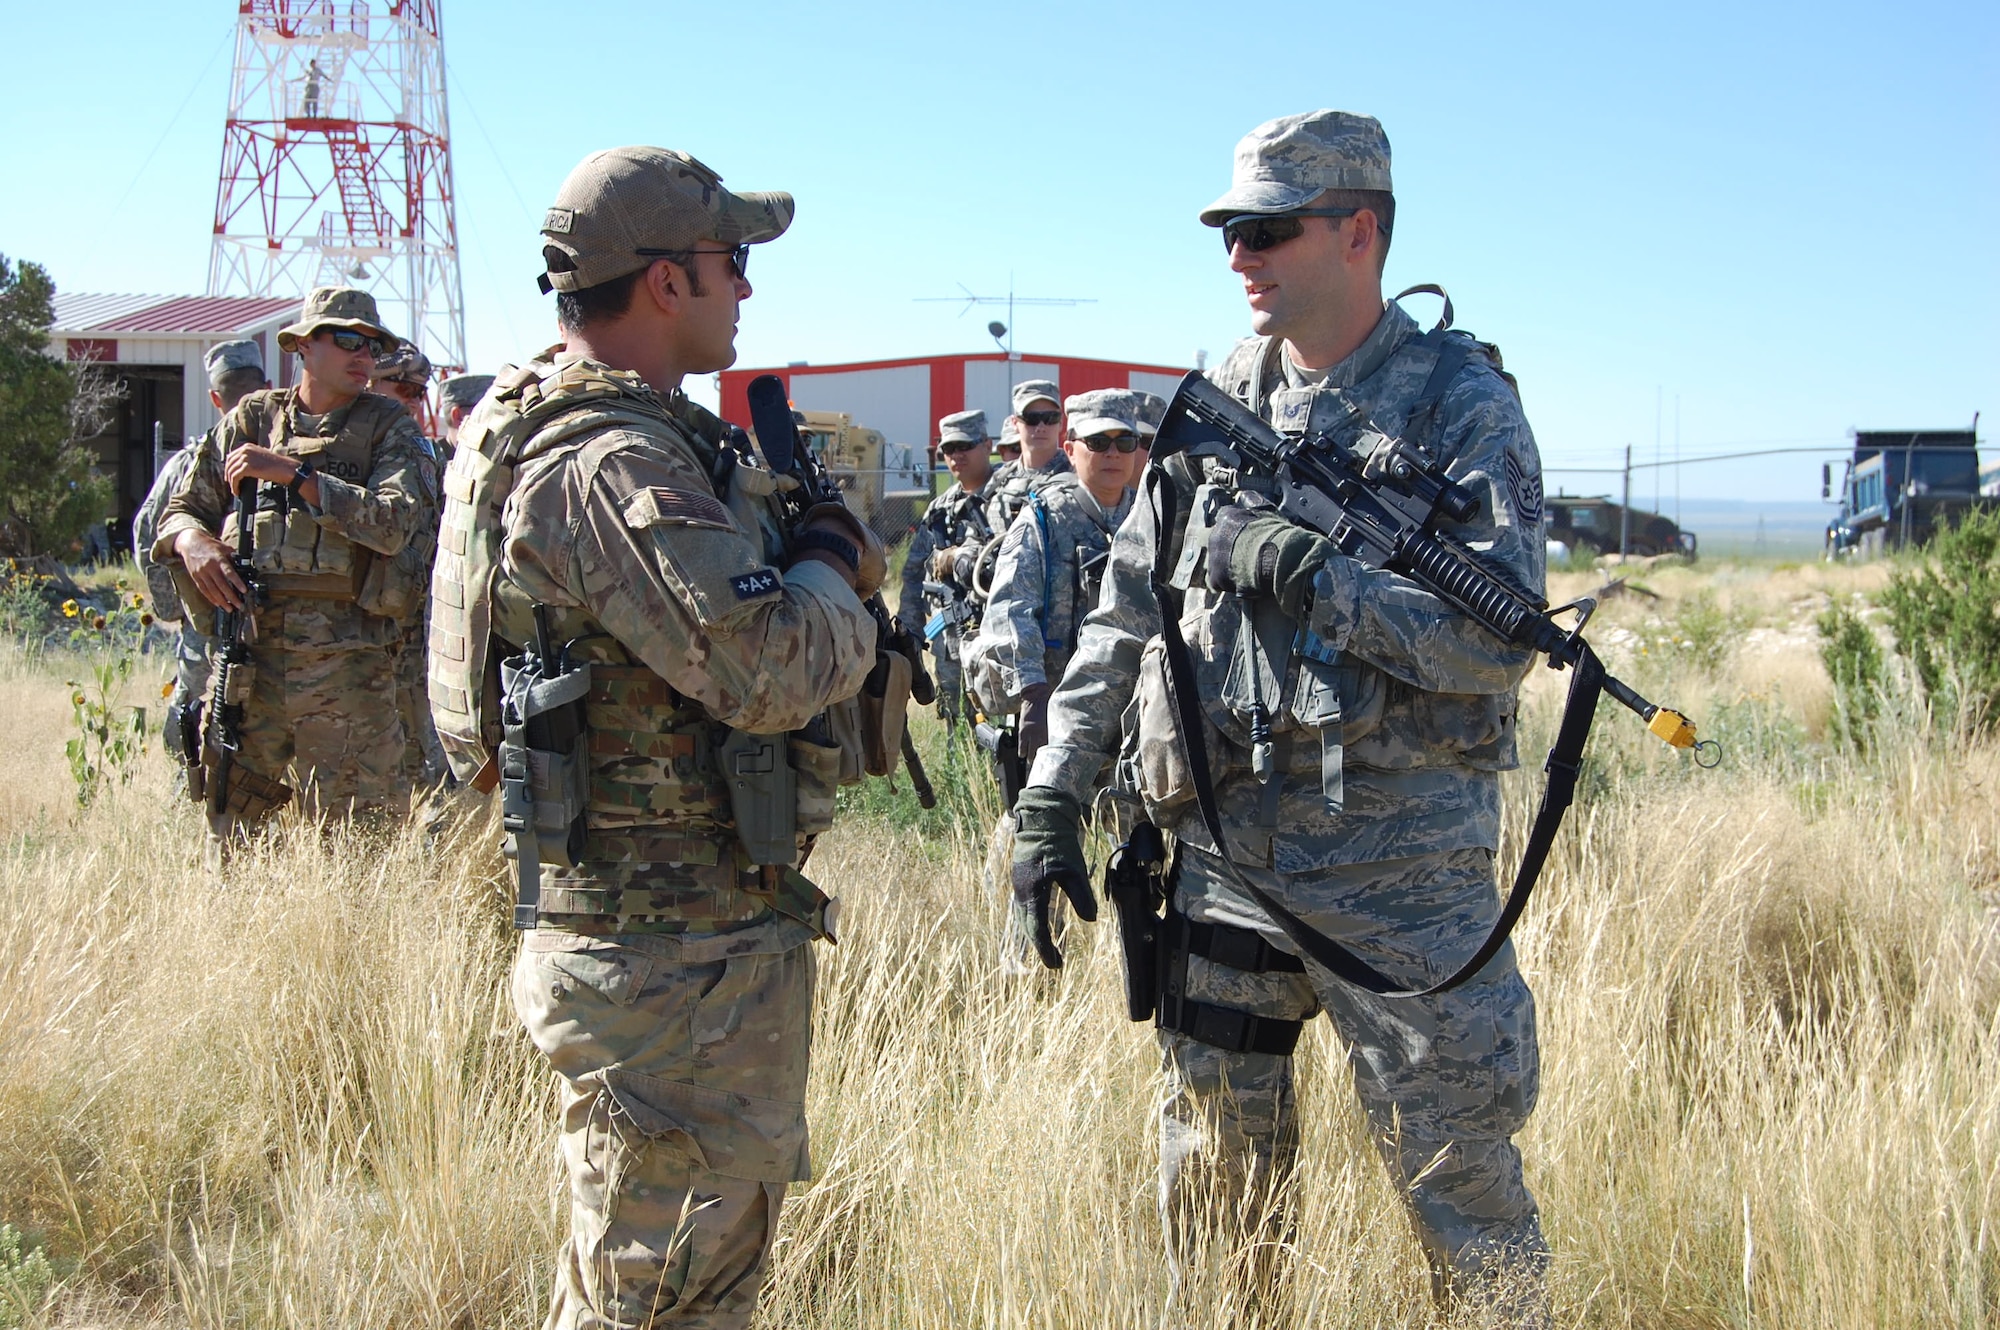 Master Sgt. Richard "Dick" Gibbons, EOD flight chief, 140th Explosive Ordnance Disposal Flight, works with Tech. Sgt. Andrew Wise, patrolman, 140th Security Forces Squadron, 140th Wing, Colorado Air National Guard, on squad movement tactics during a training day August 4 at Airburst Range, Fort Carson, Colo. (US Air National Guard photo by Capt. Kinder Blacke)